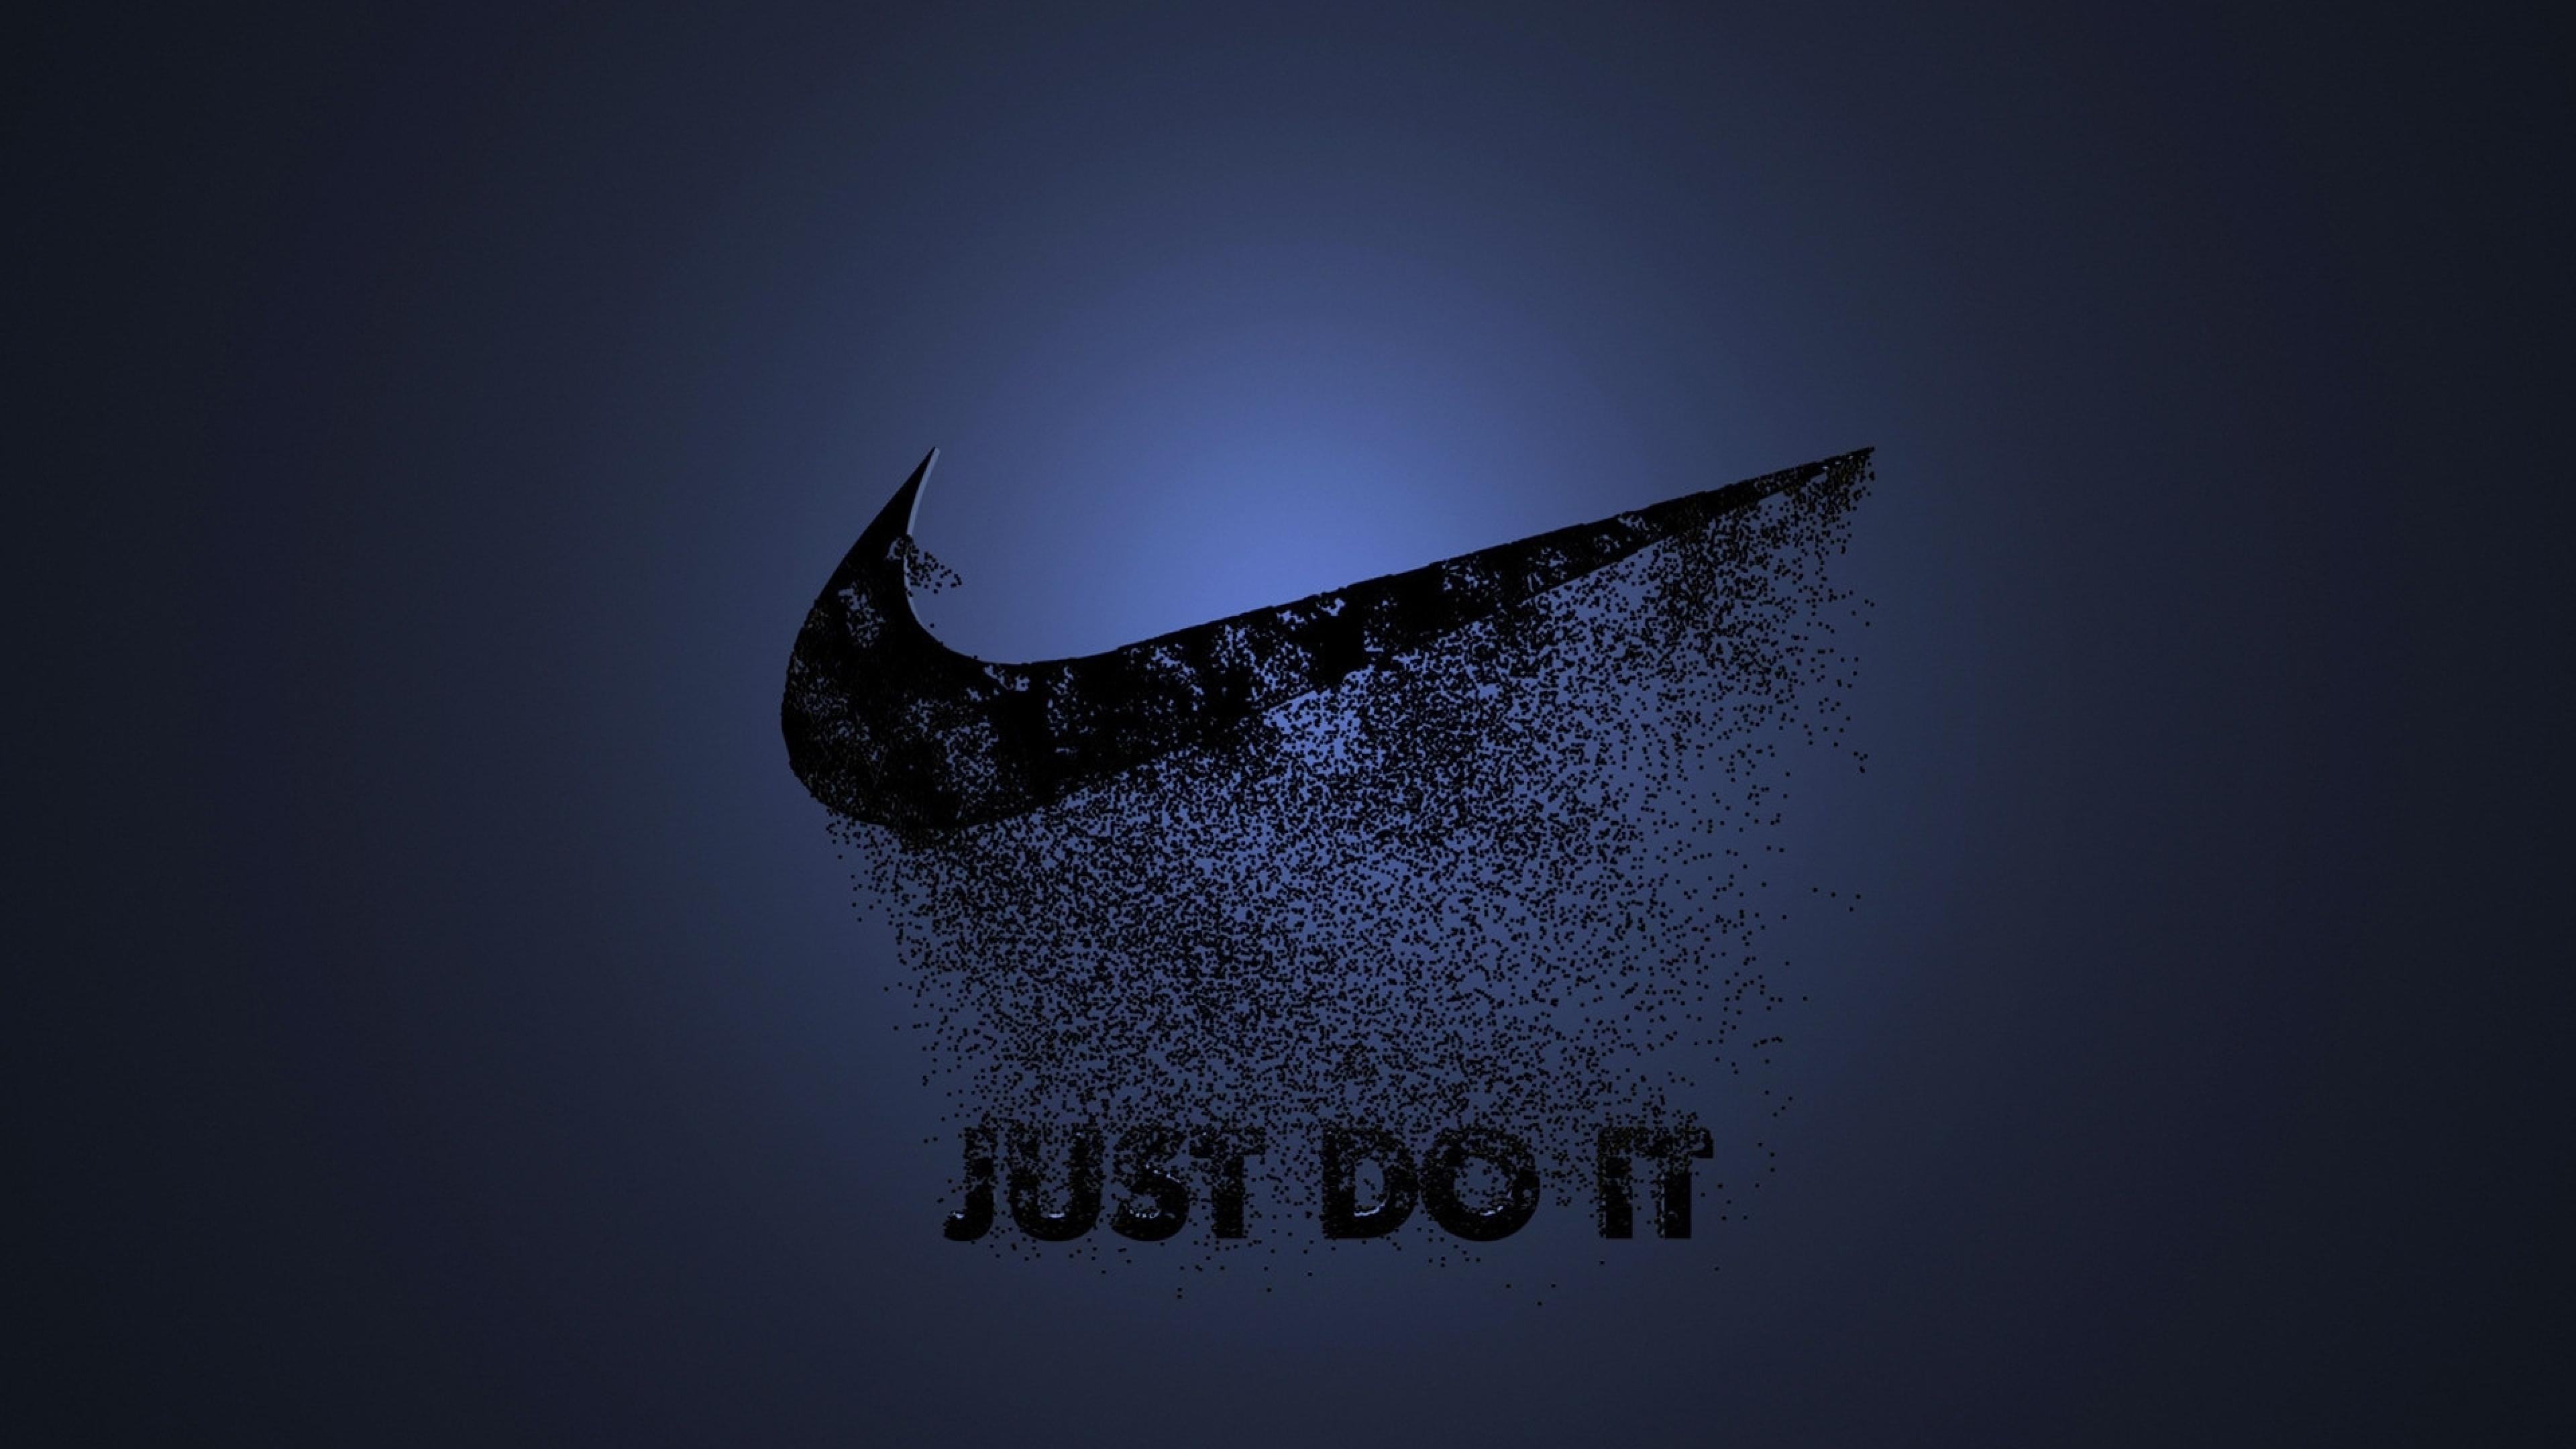 Nike wallpapers full hd just do it | Wallpapers, Backgrounds ...